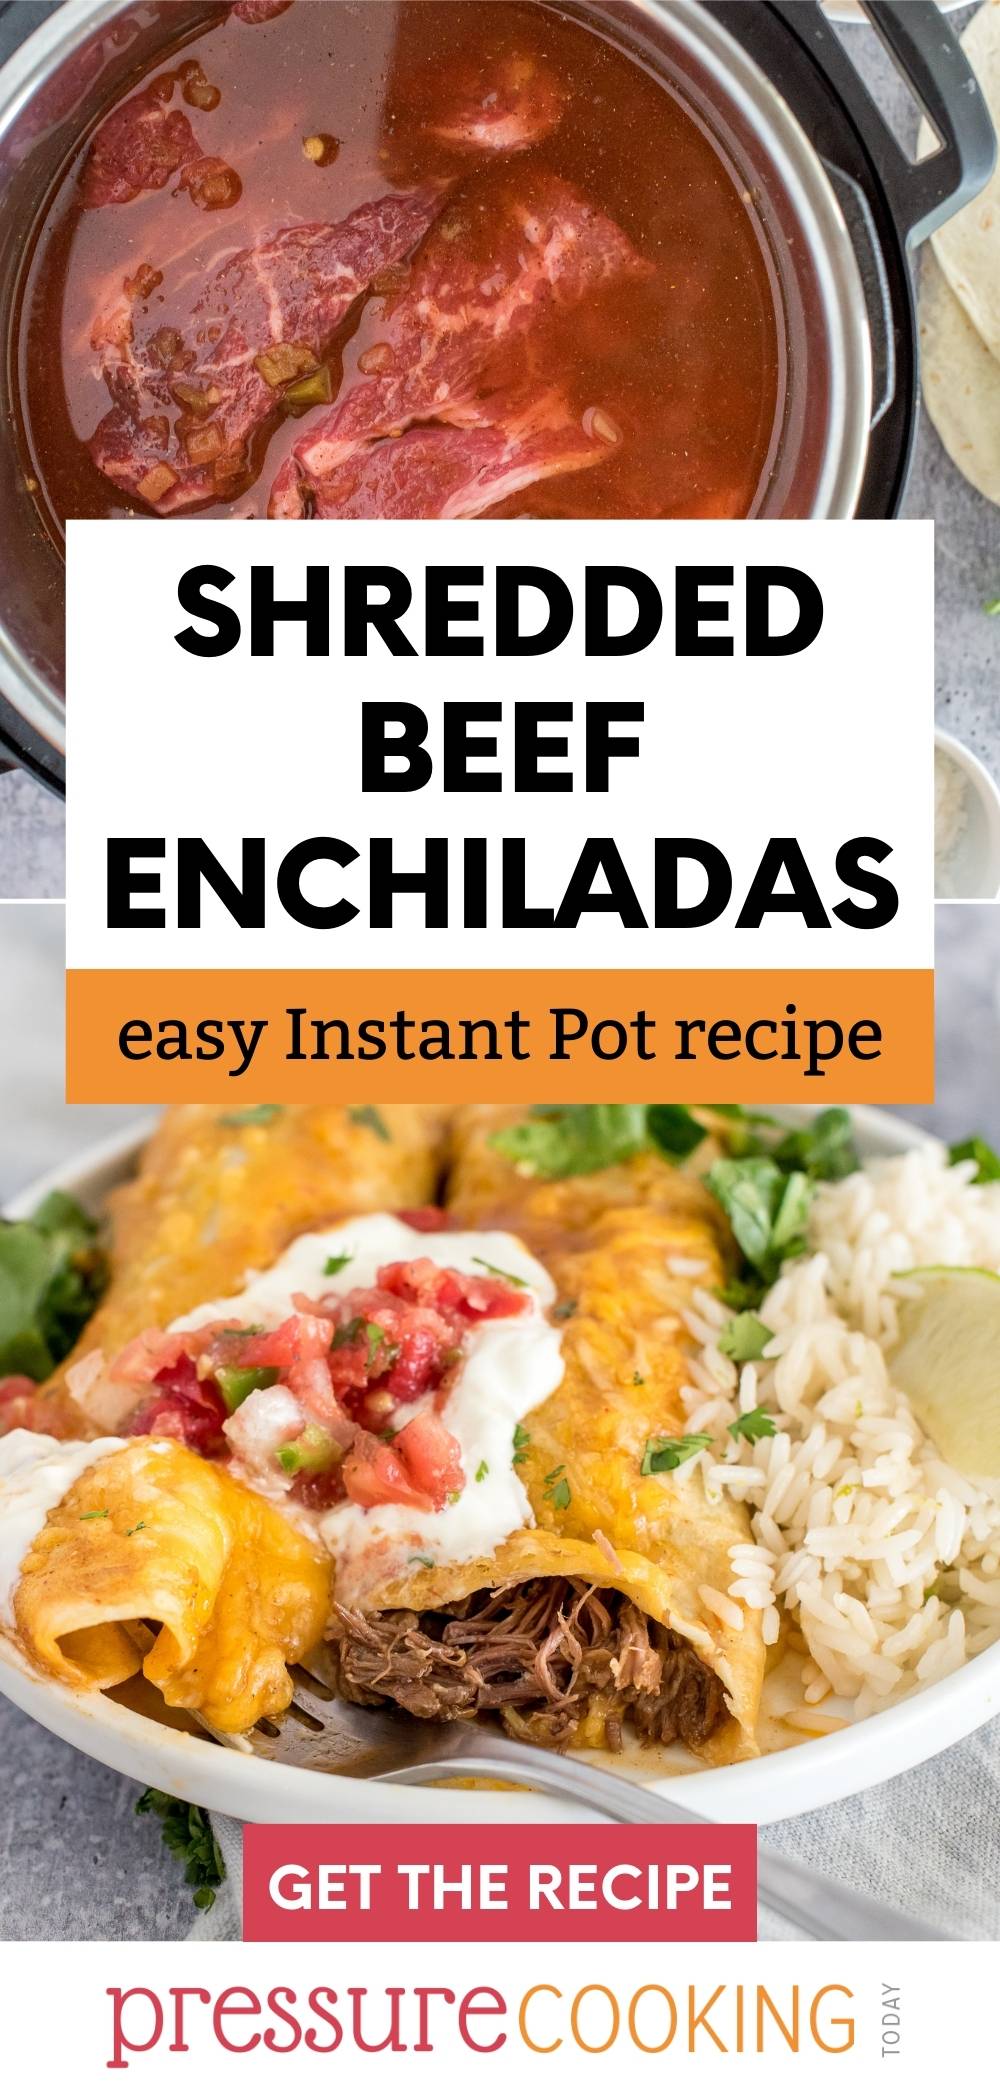 A pinterest image that reads "Shredded Beef Enchiladas: Easy Instant Pot recipe" over two photos: the top photo is the chuck roast uncooked in the Instant Pot, and the bottom is a close-up of two shredded beef enchiladas that show the shredded beef via @PressureCook2da